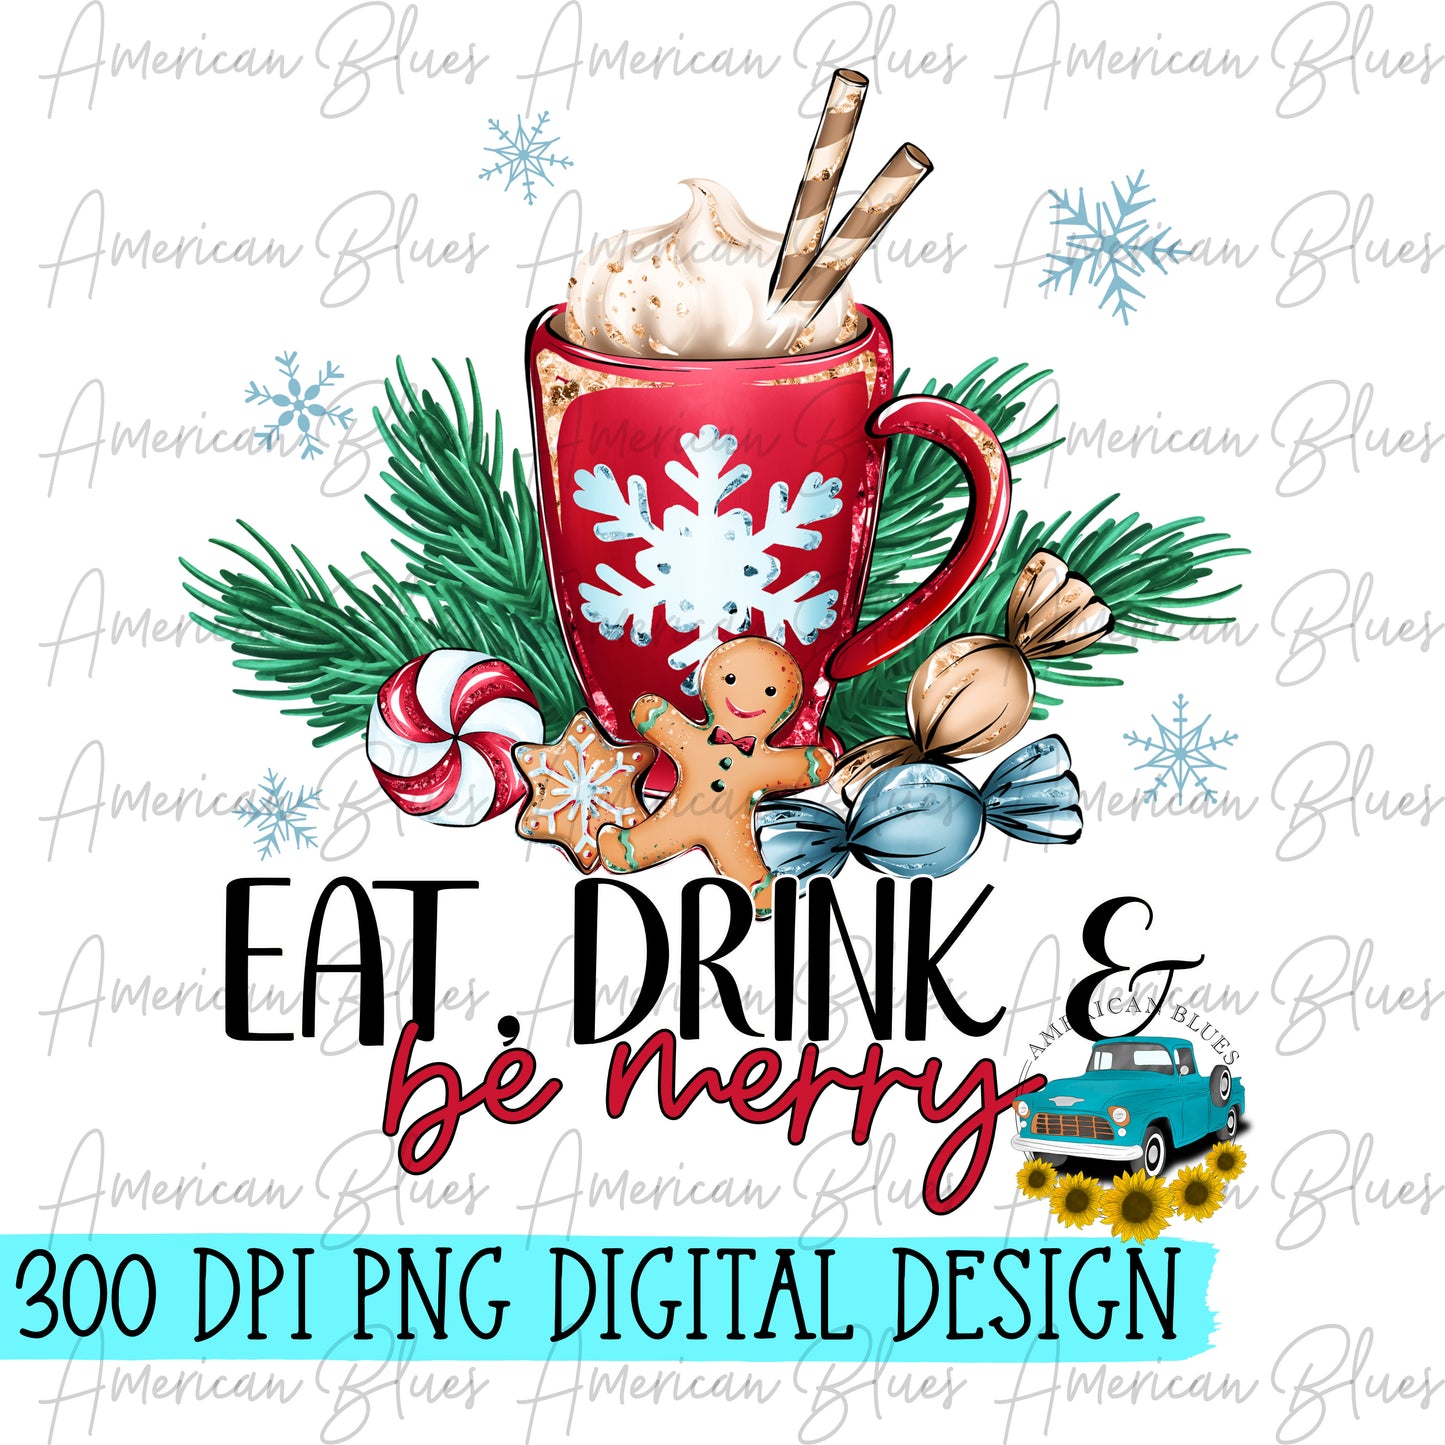 Eat, drink & be merry